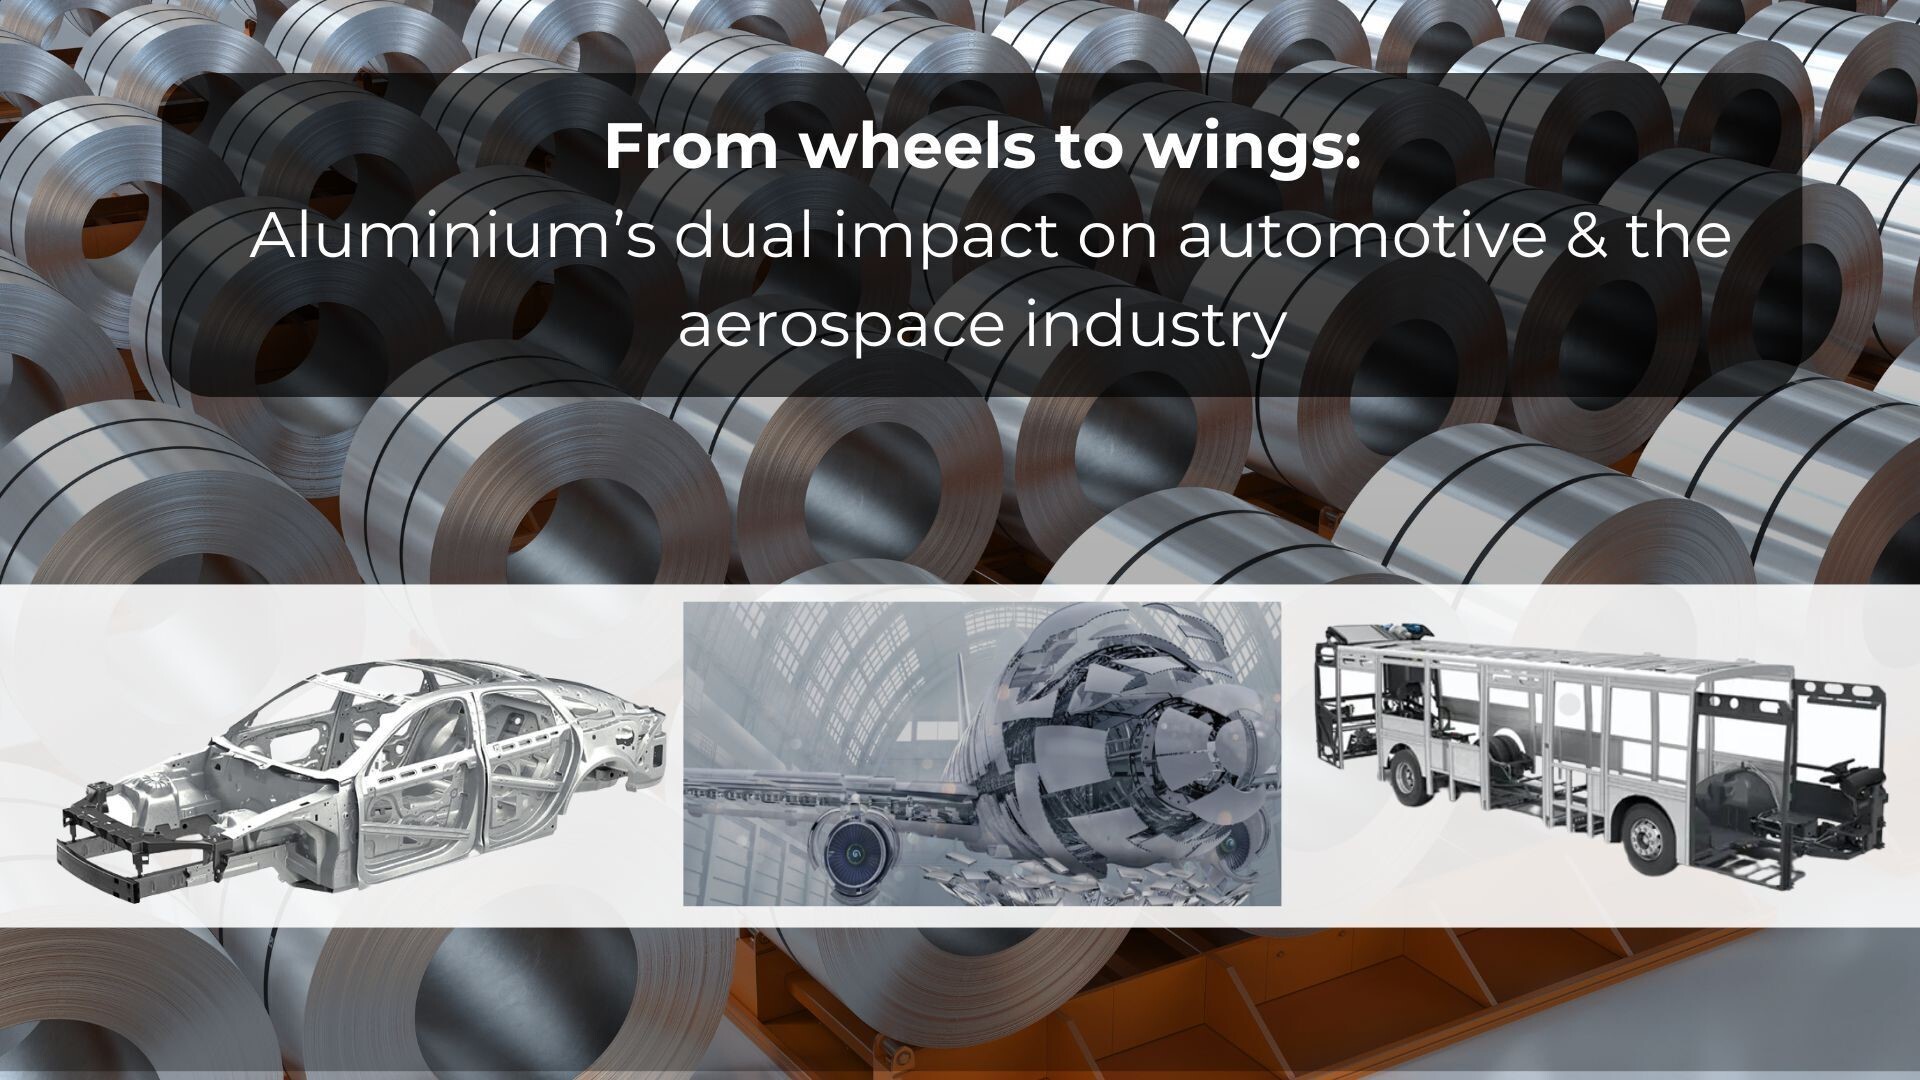 From wheels to wings: Aluminium’s dual impact on automotive & the aerospace industry